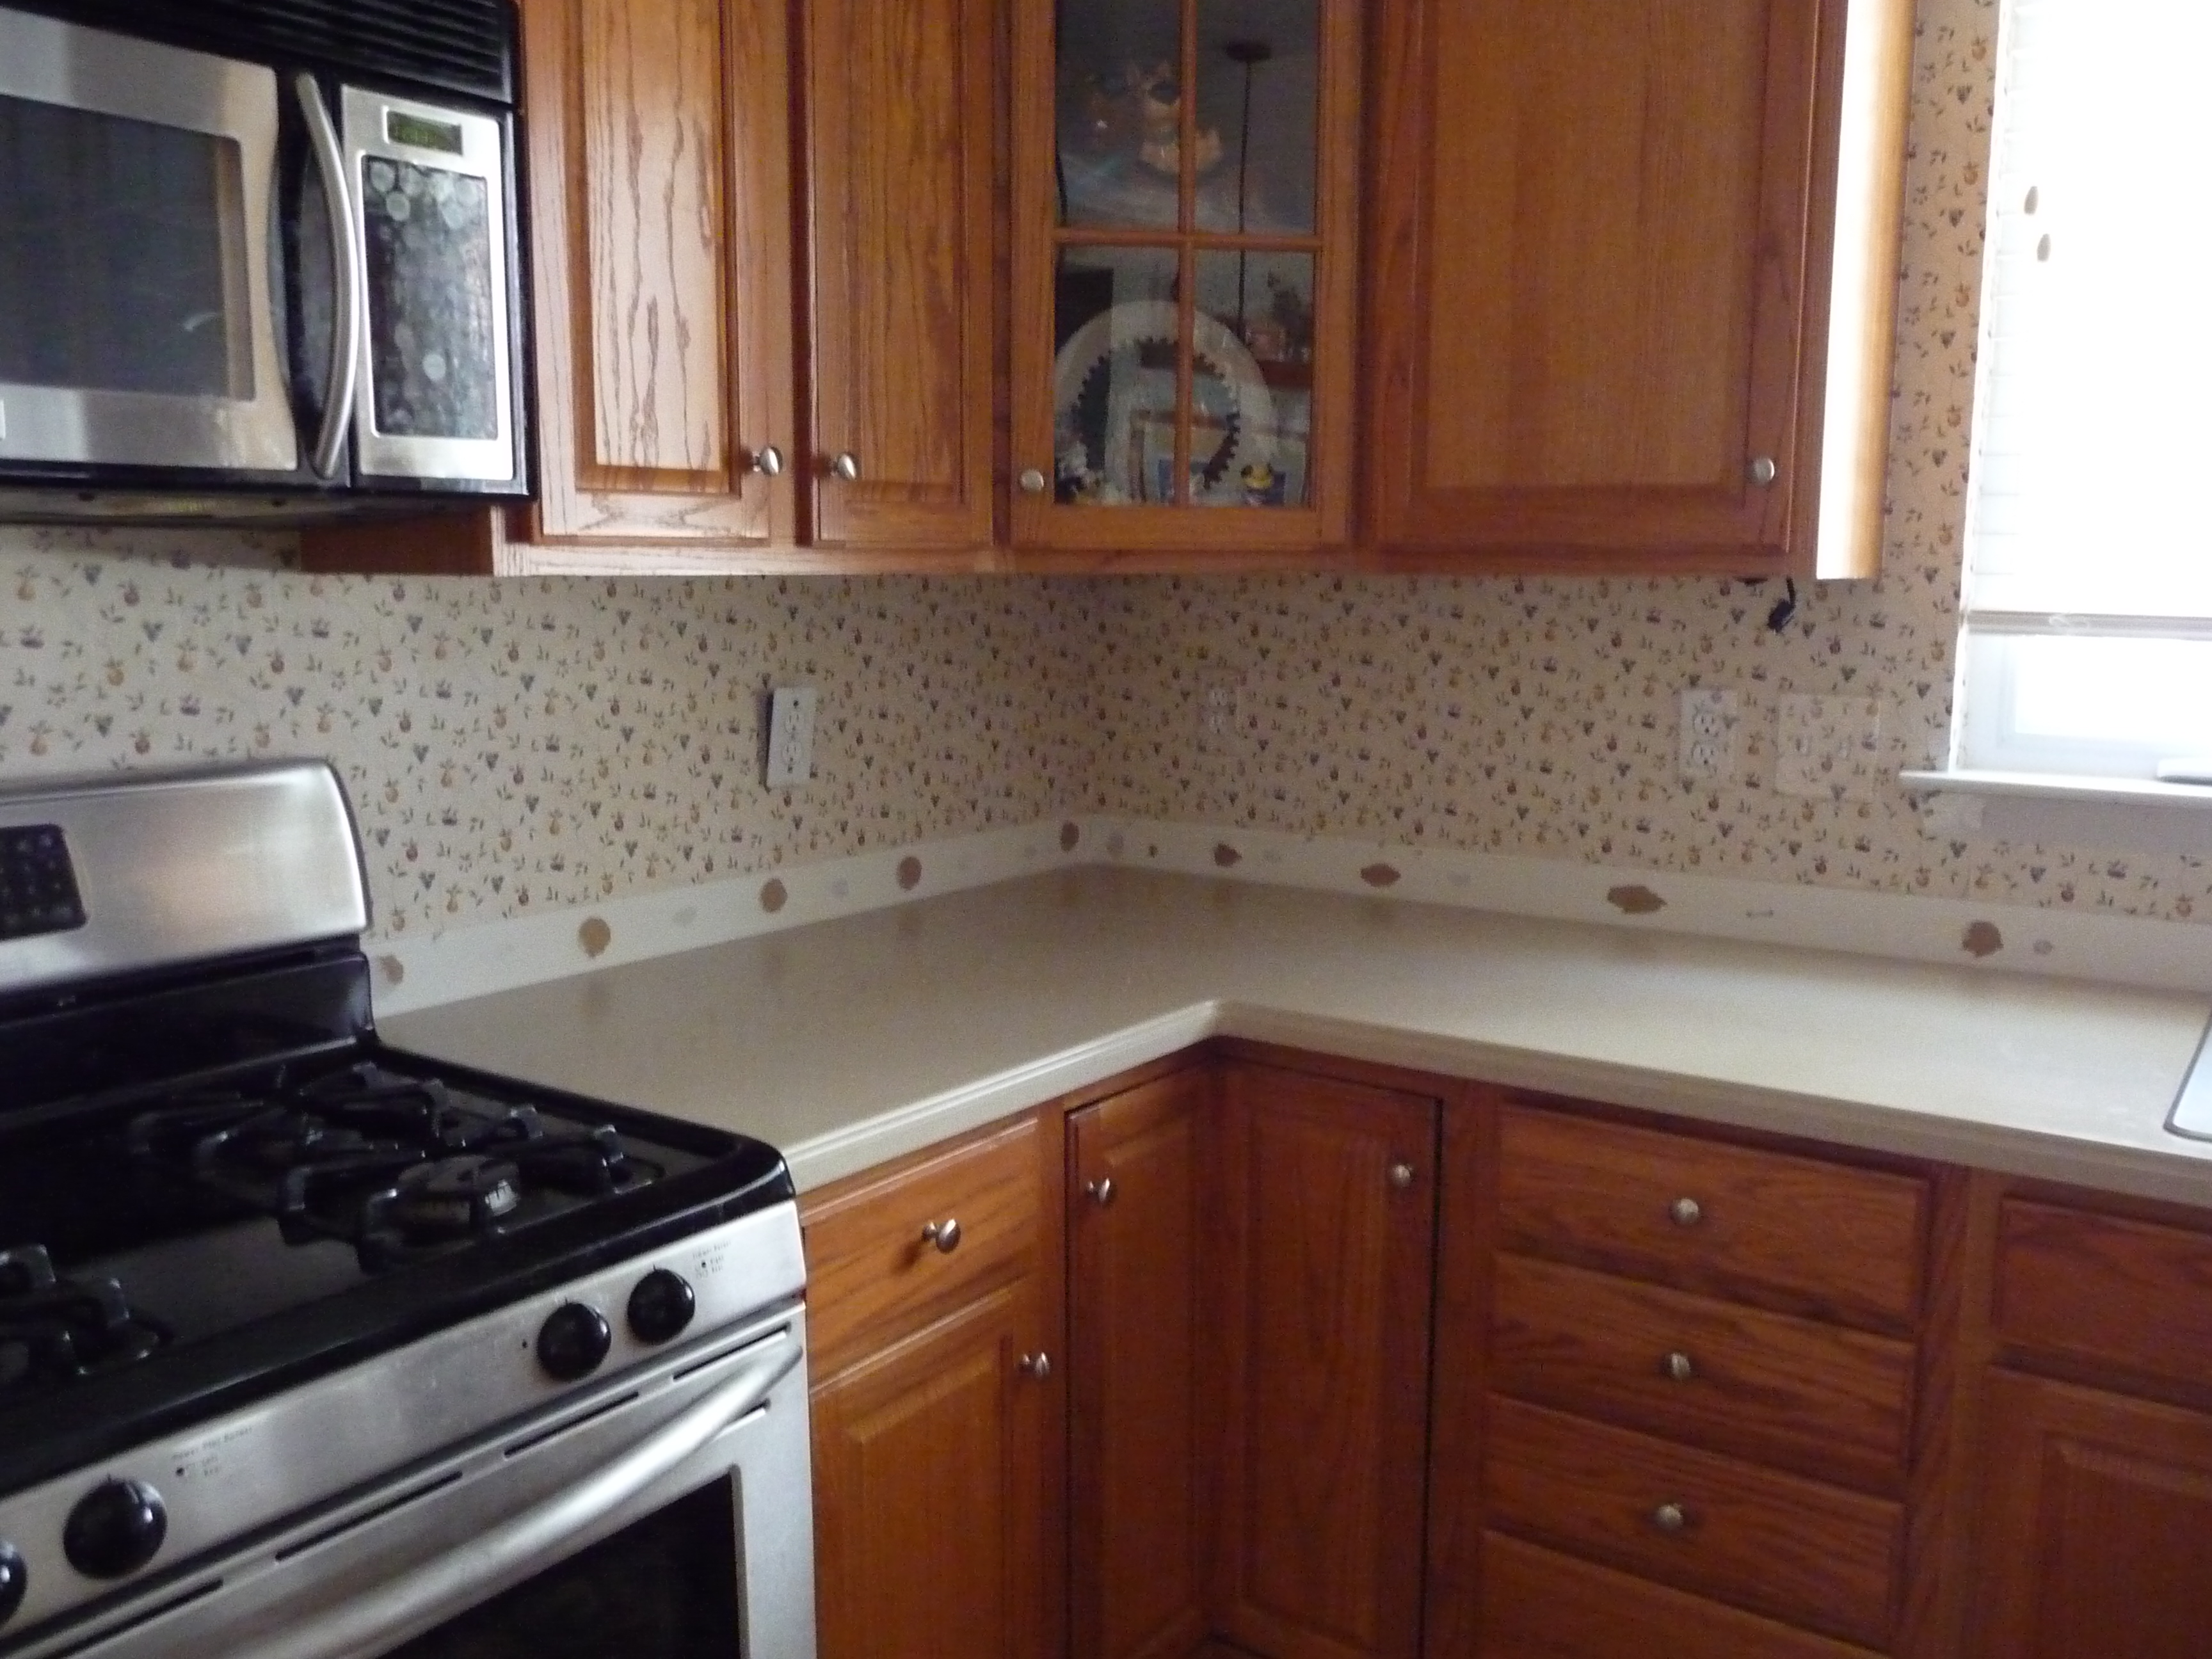 New Kitchen Backsplash With Decorative Stone Before Picture